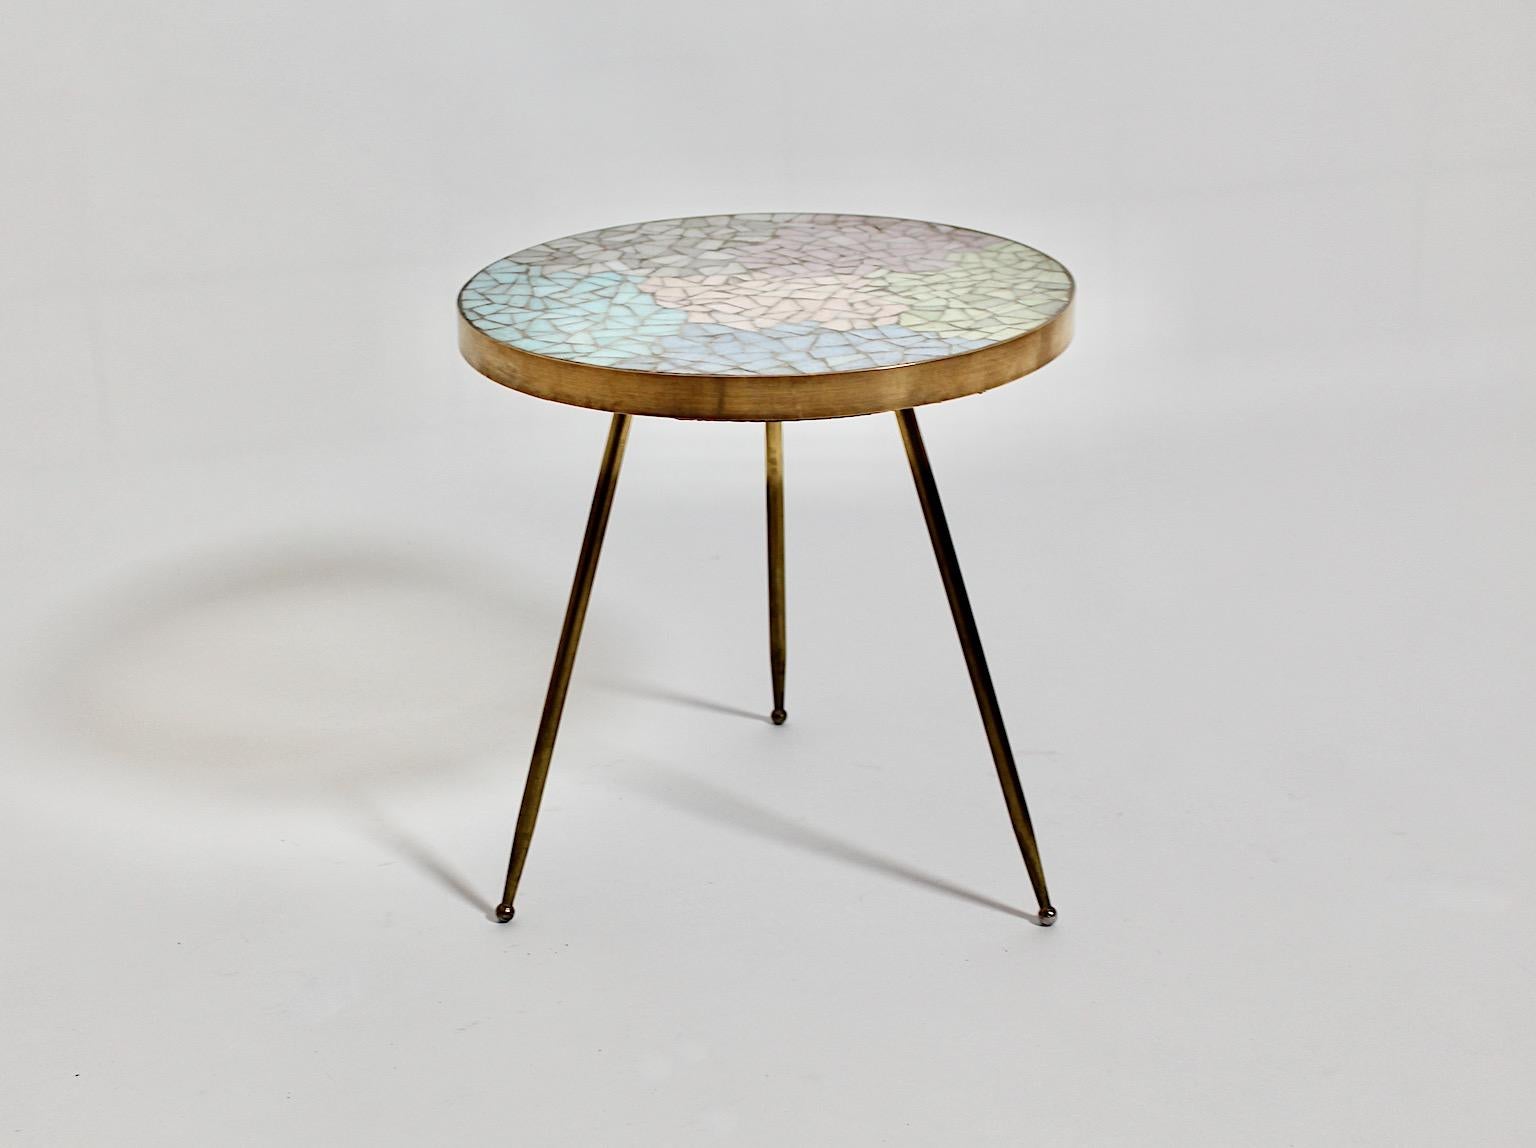 Modern vintage circular cute and tiny side table or flower table from brass and pastel colored mosaic elements 1990 Italy.
An amazing side table with brass base with three legs and a brass trim framed the top showing a pastel colored mosaic plate.